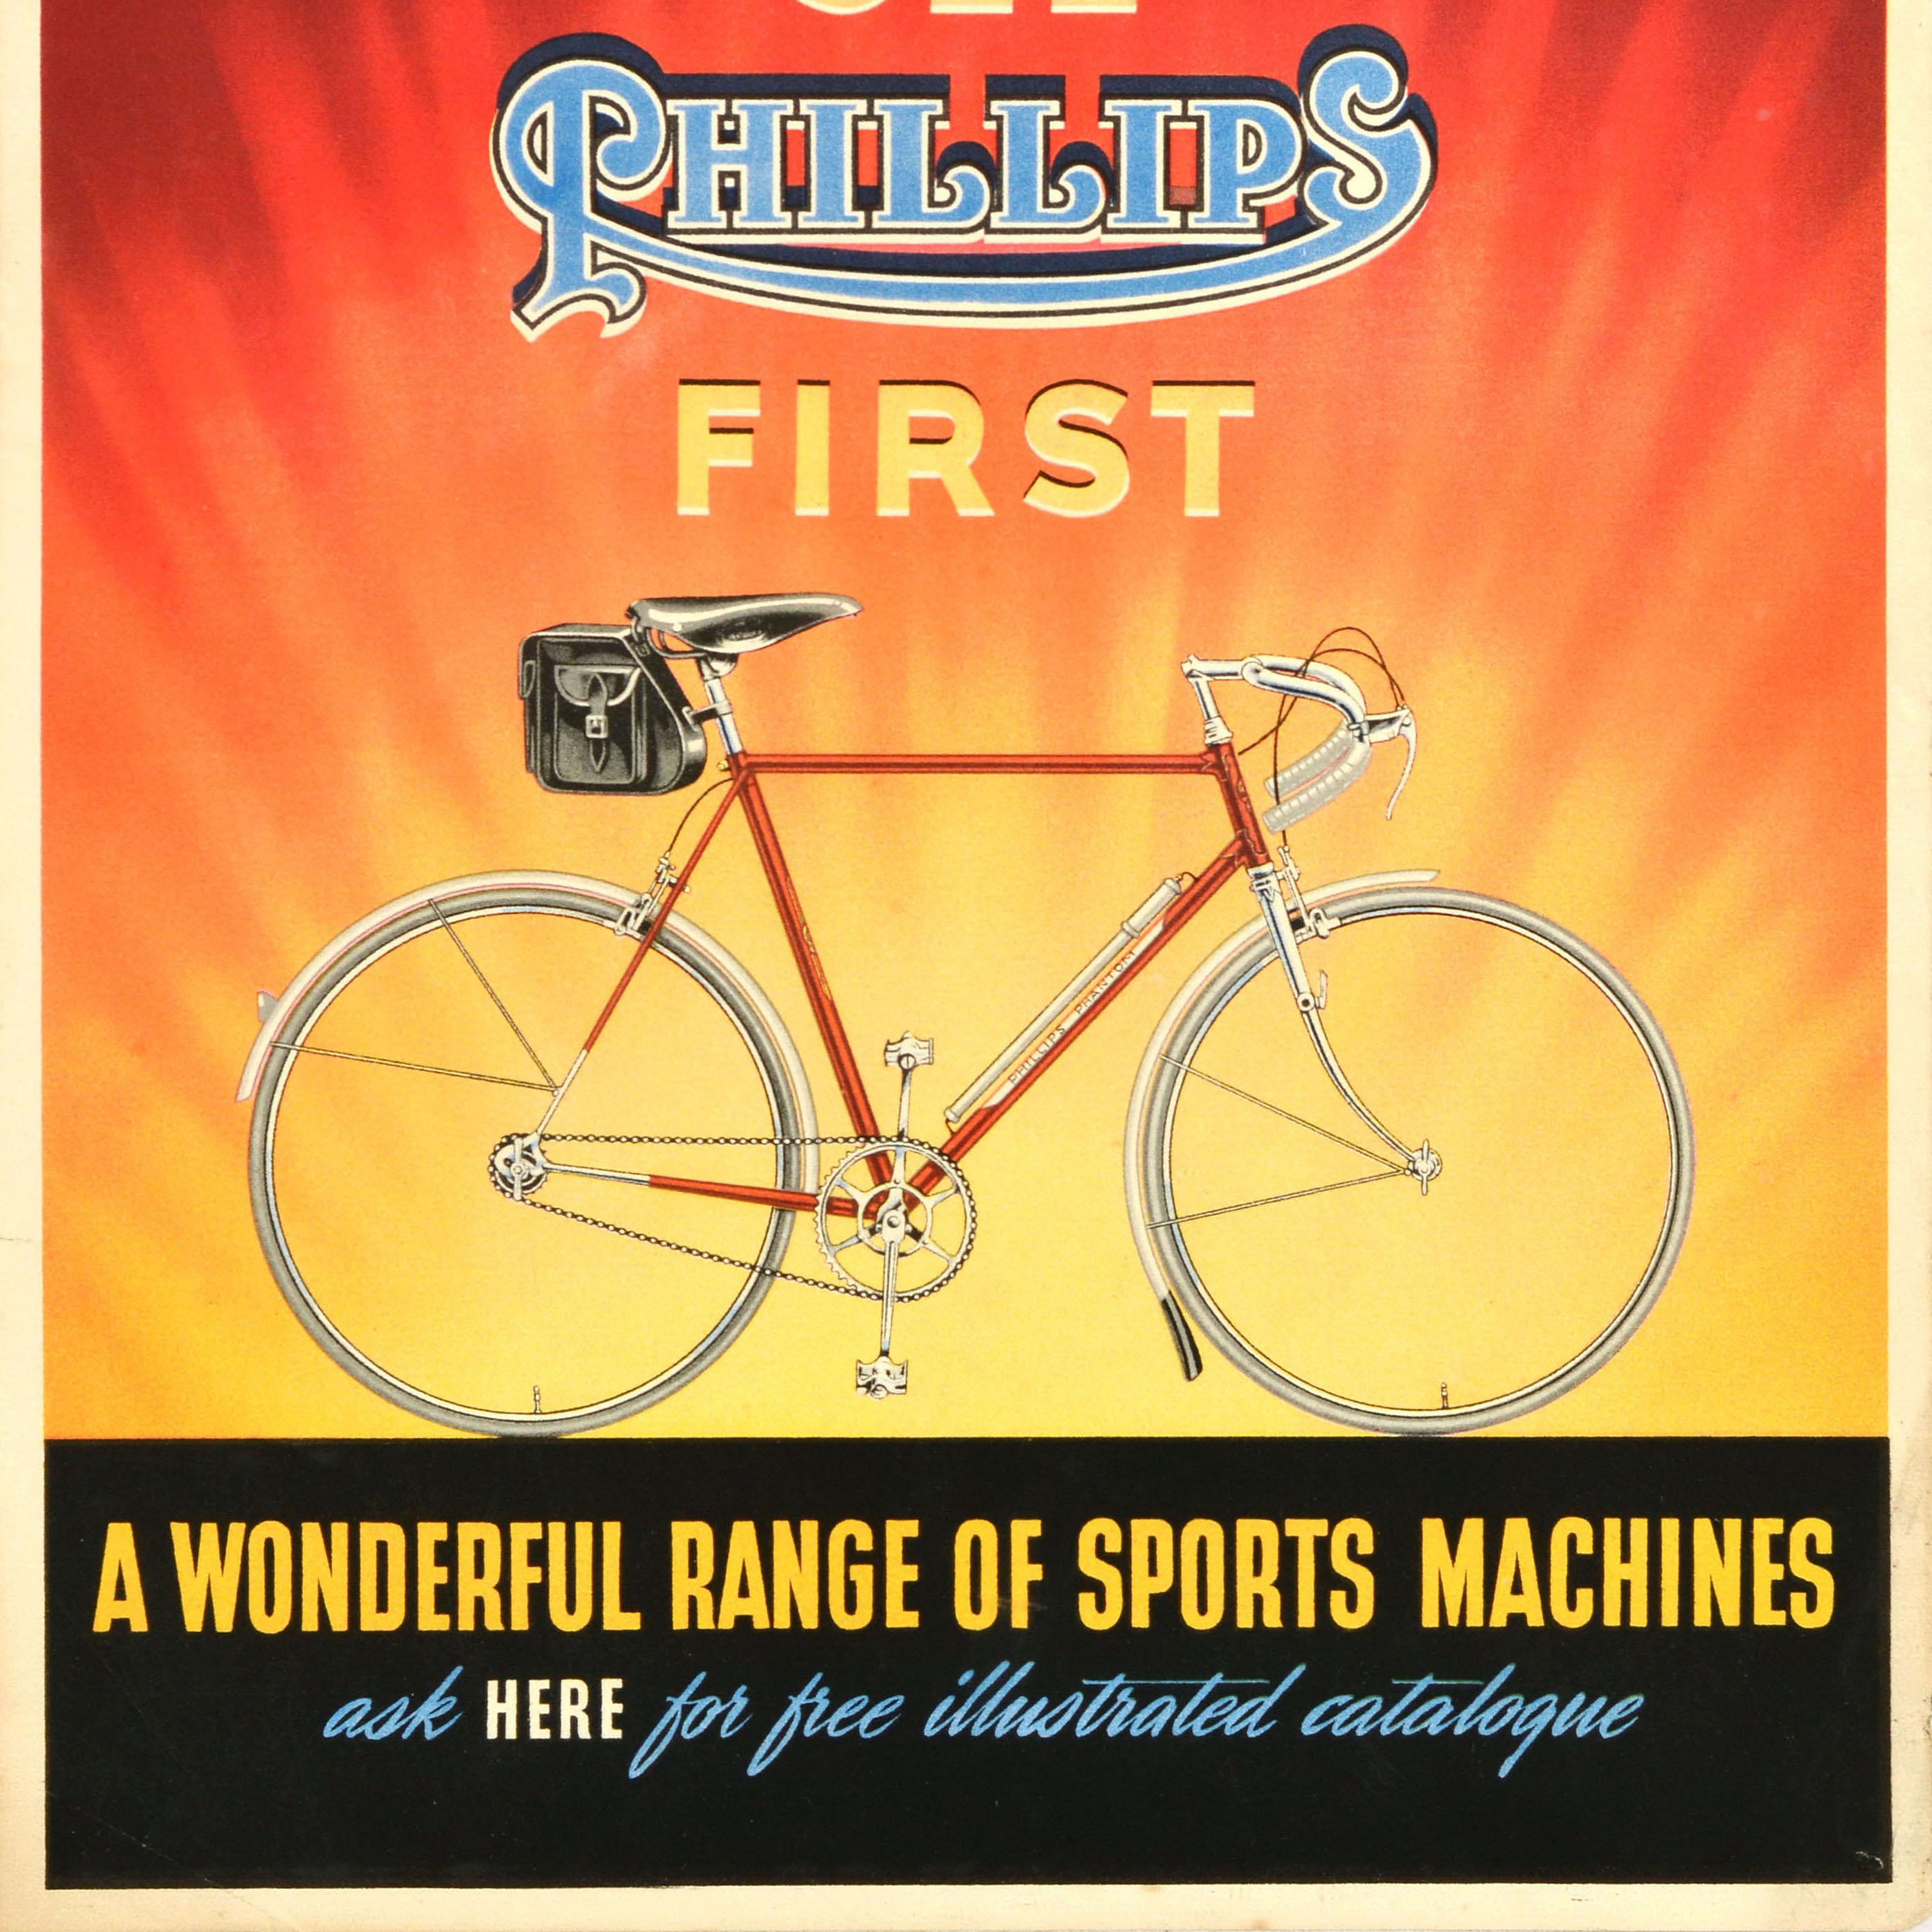 British Original Vintage Bicycle Advertising Poster See Phillips First Sports Machines For Sale